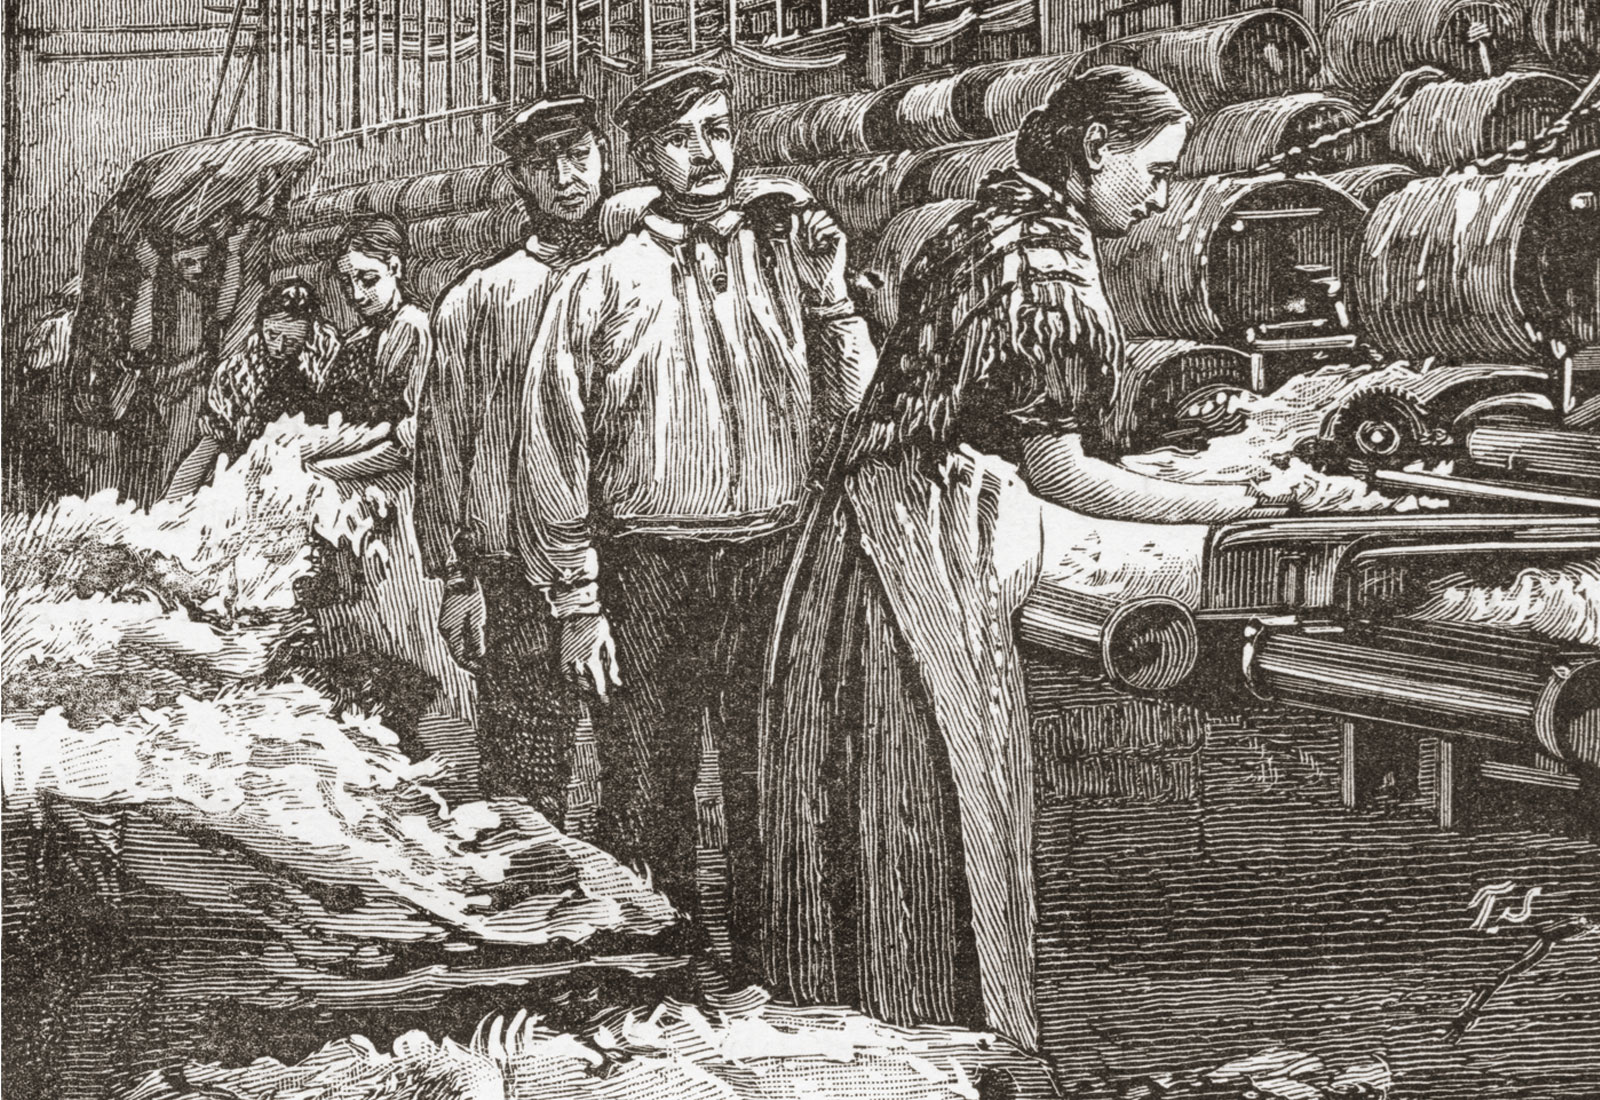 historical etching of people working in a wool mill